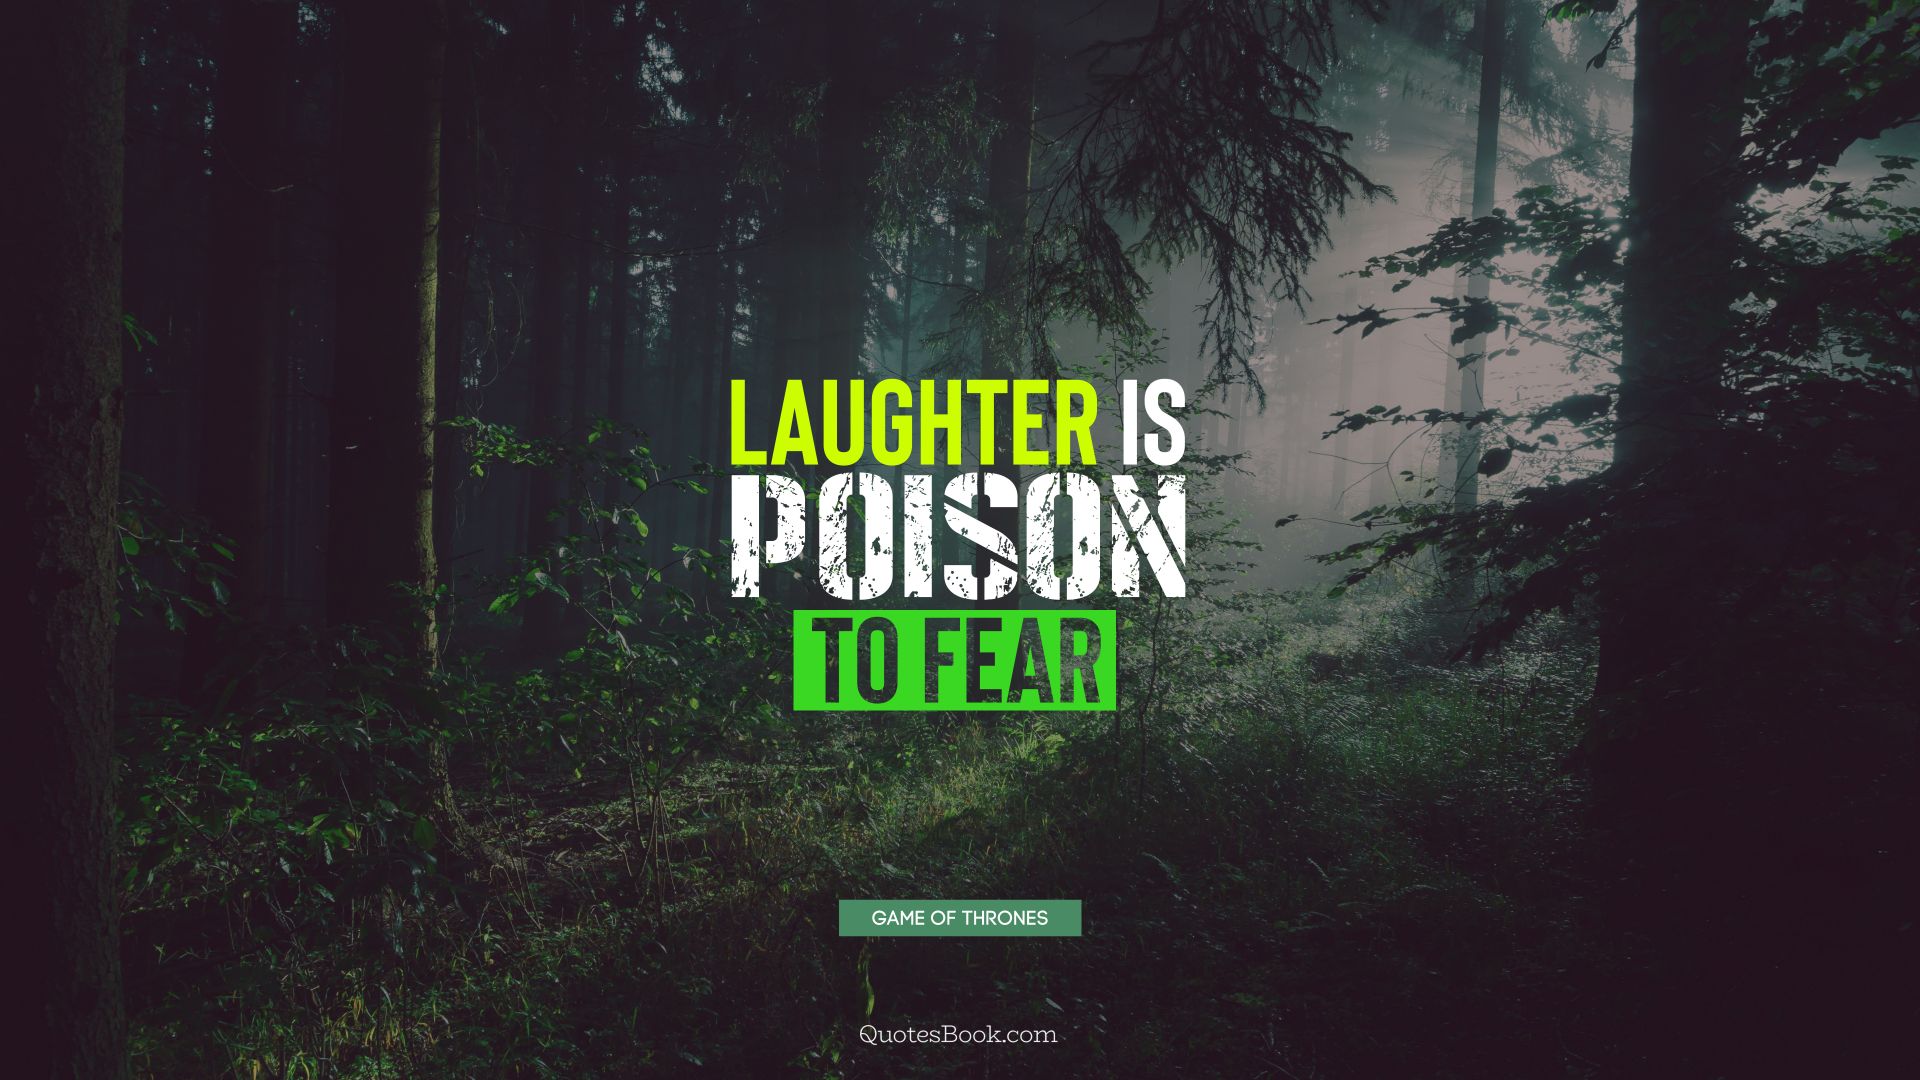 Laughter is poison to fear. - Quote by George R.R. Martin